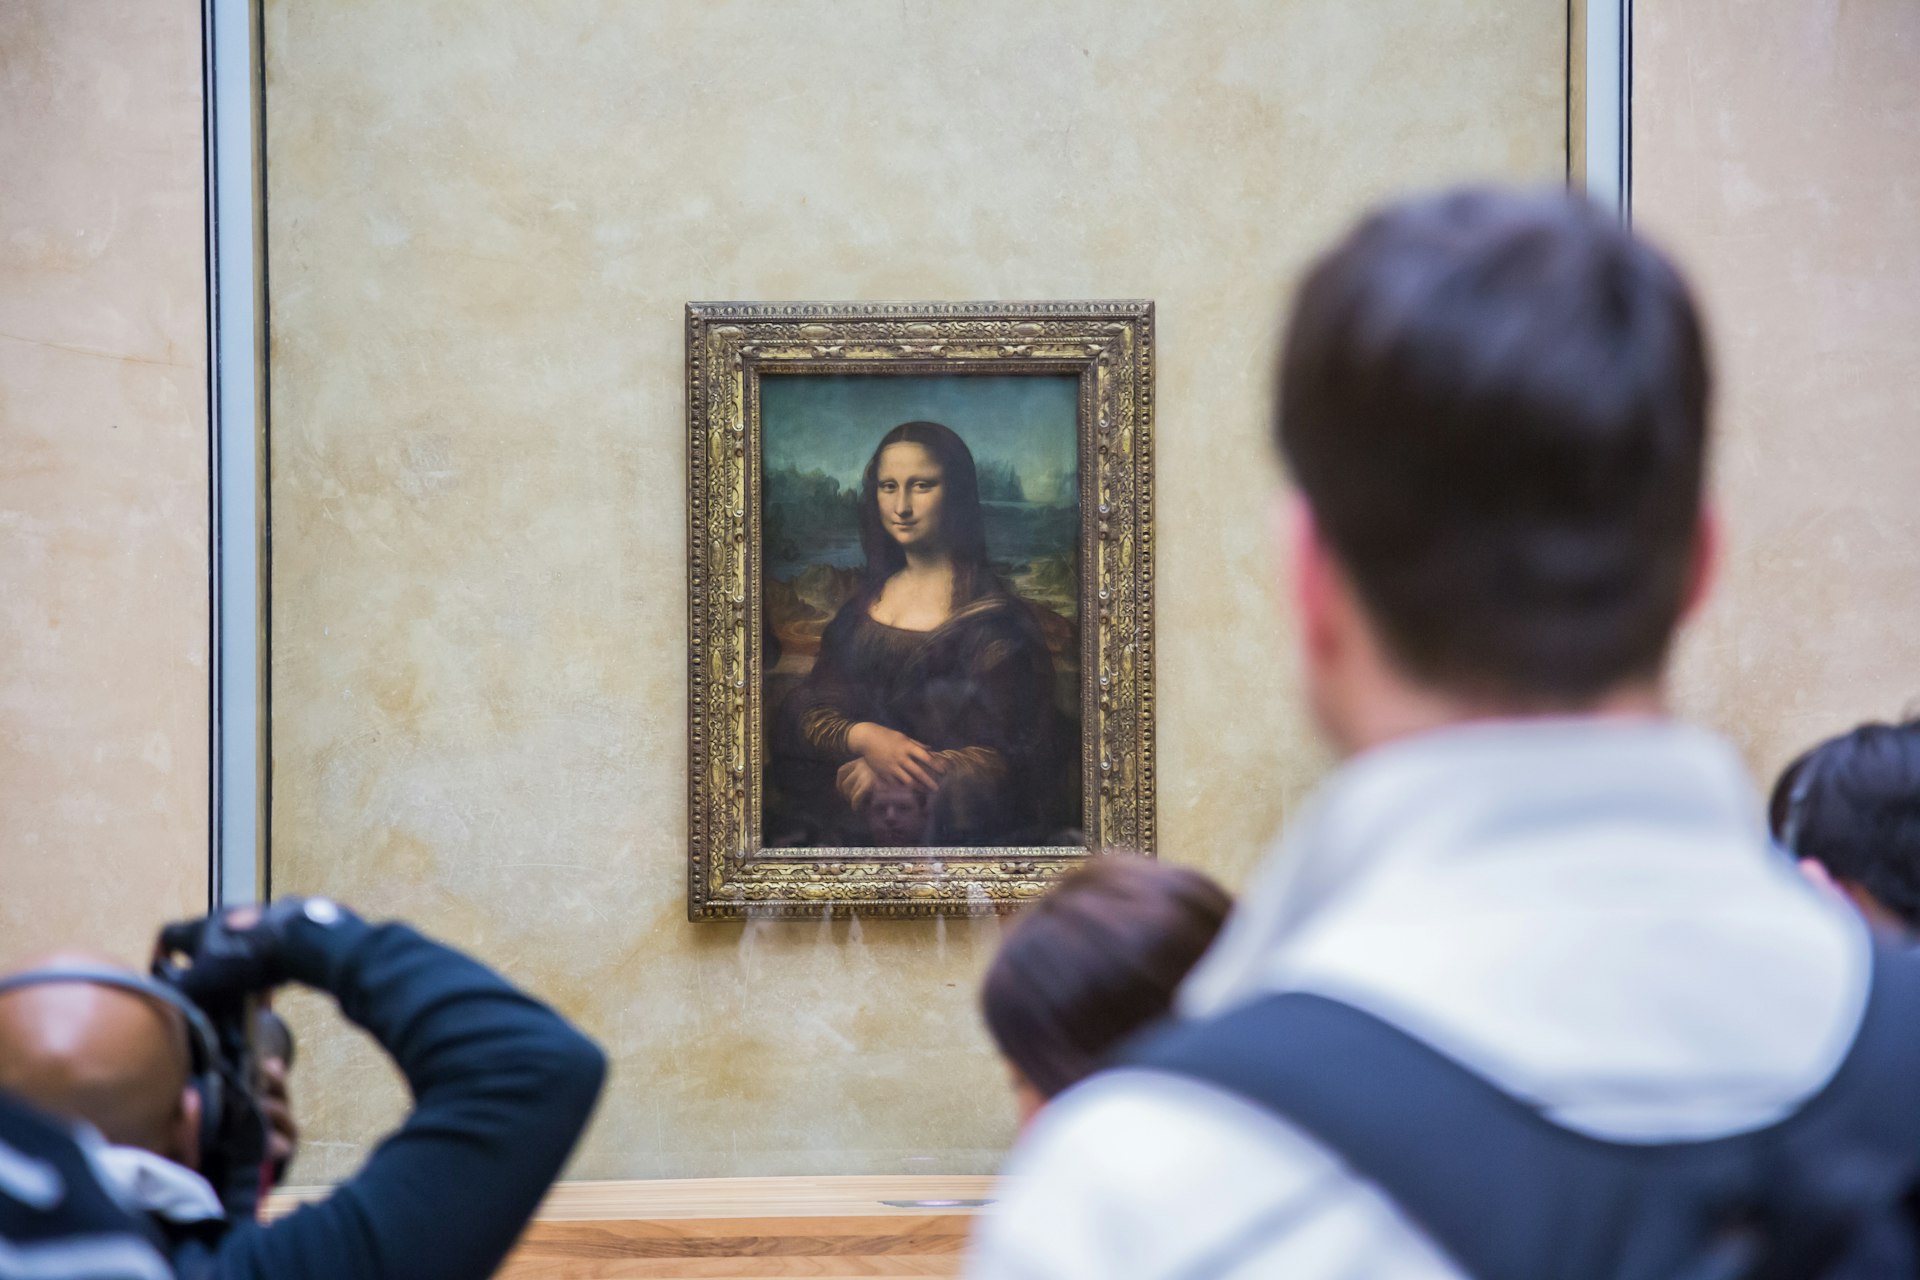 A crowd of people look at the Mona Lisa painting